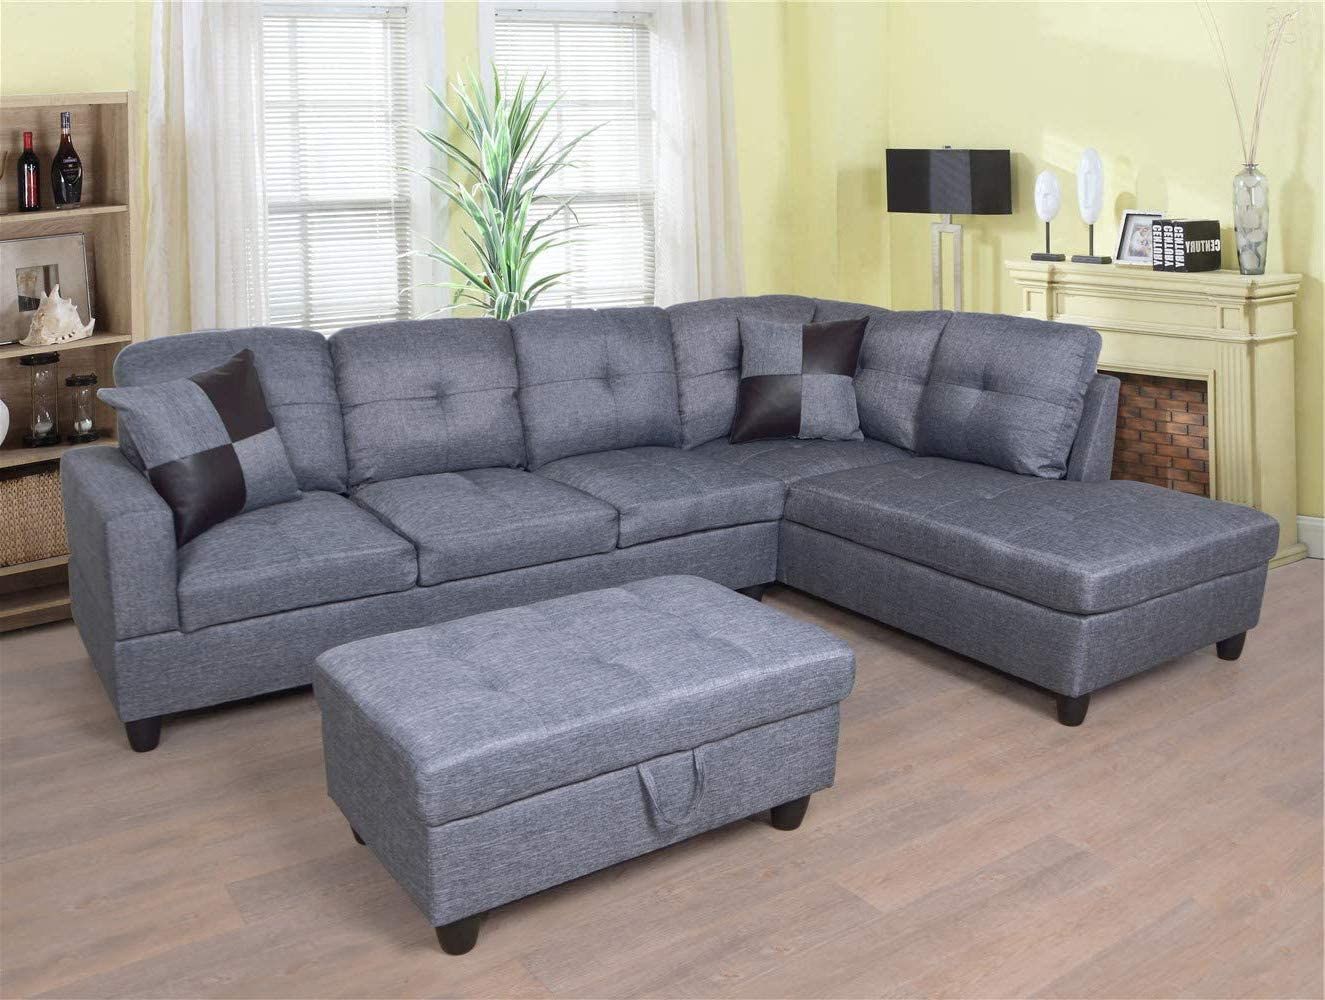 Ponliving Furniture 3 Pcpiece Sectional Sofa Couch Set, L Inside Owego L Shaped Sectional Sofas (View 1 of 15)